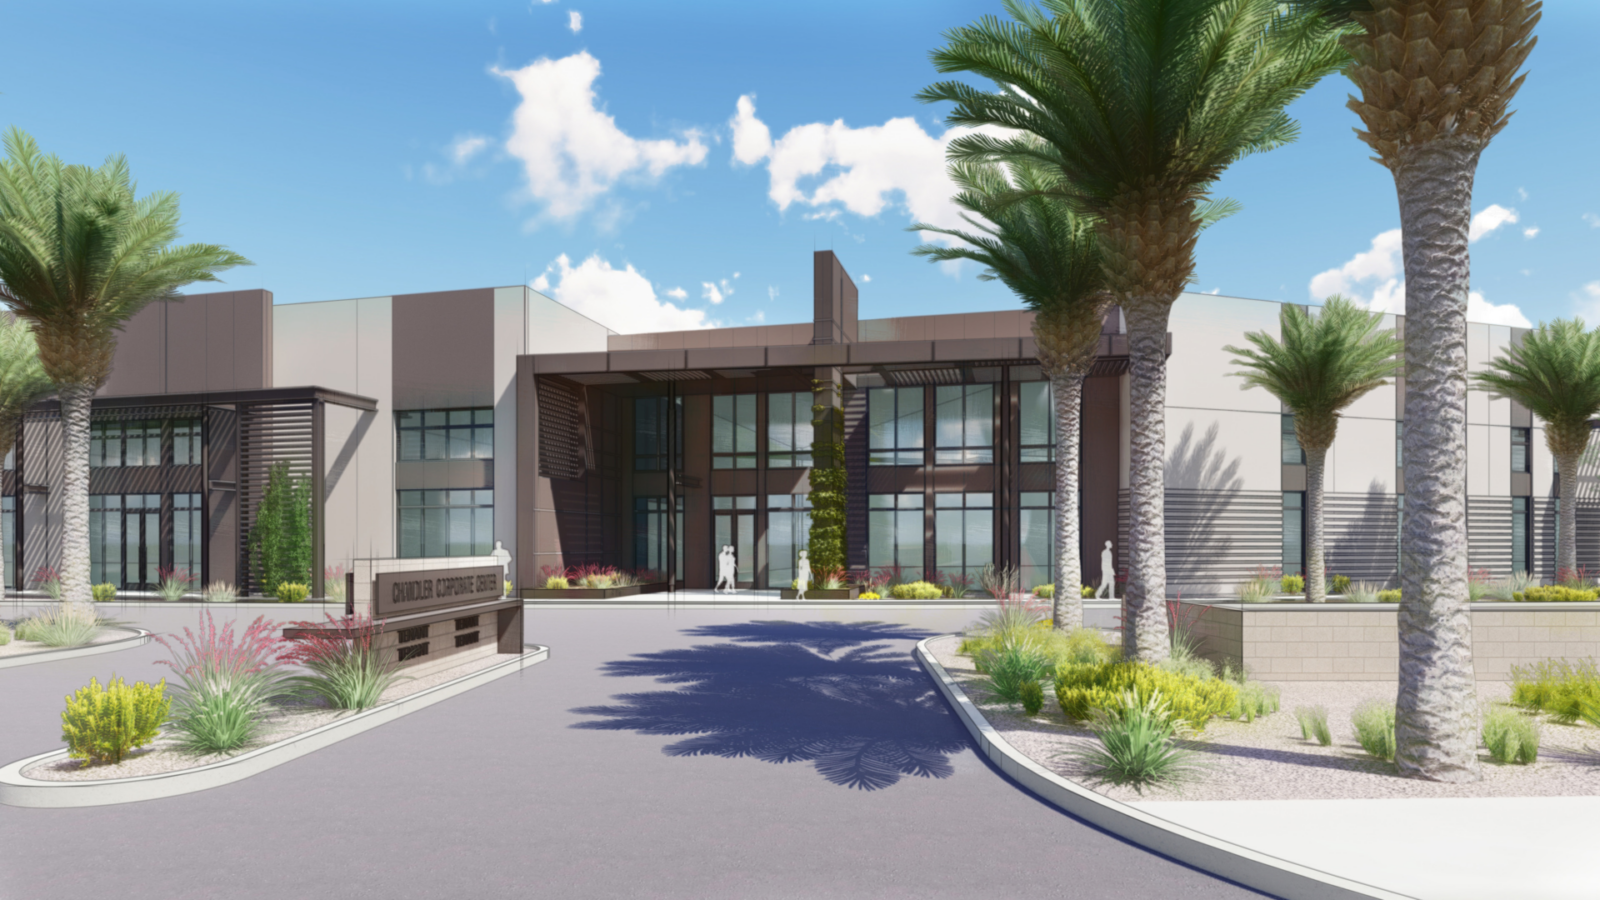 Chandler Corporate Industrial Center II will add 86,286 square feet of office/warehouse space to the East Valley once completed in Q1 2023.